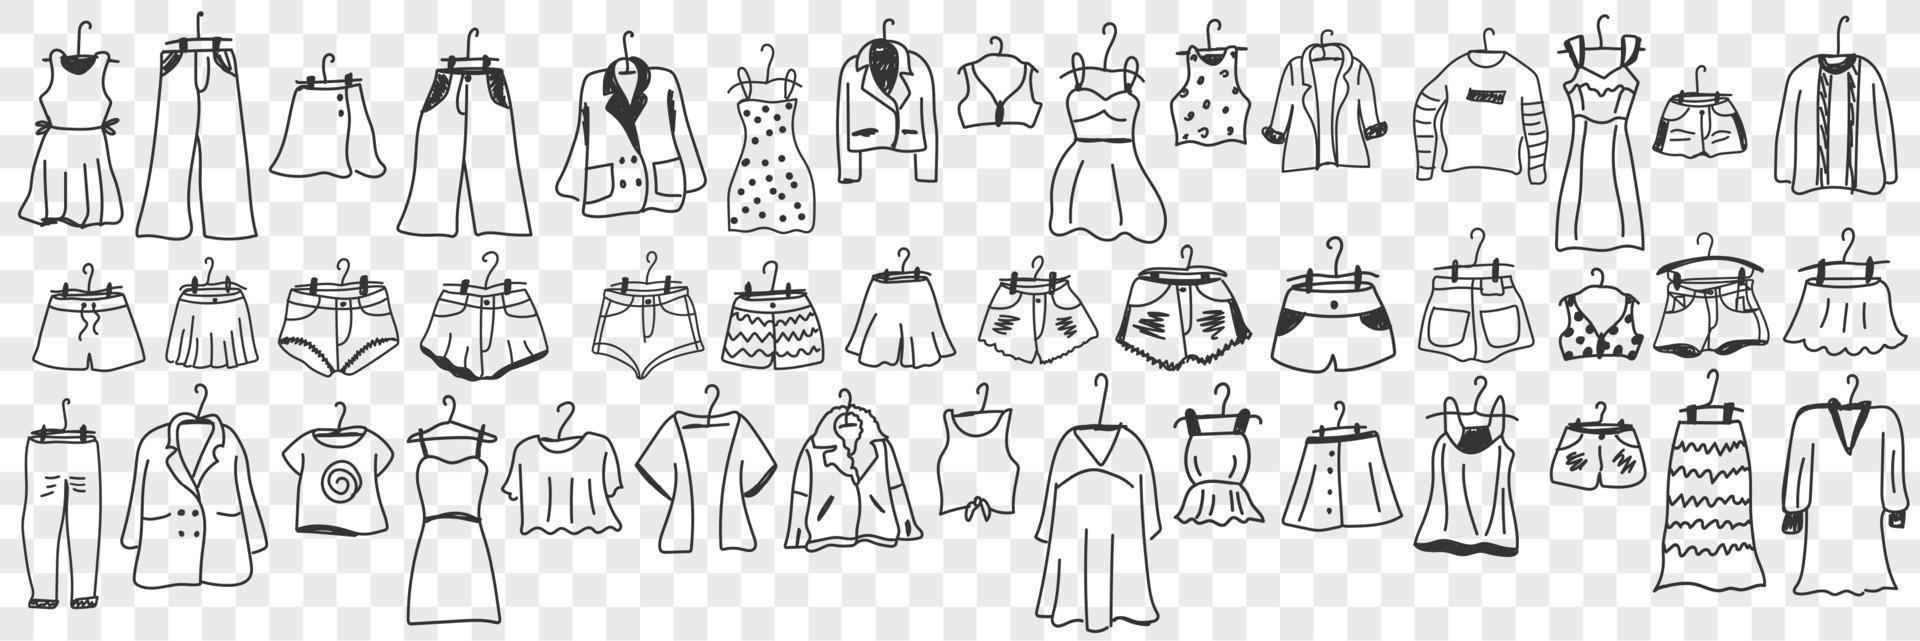 Female and male clothes outfit doodle set. Collection of hand drawn garment dress pants jacket bags shorts new on hangers for wearing or shopping isolated on transparent vector